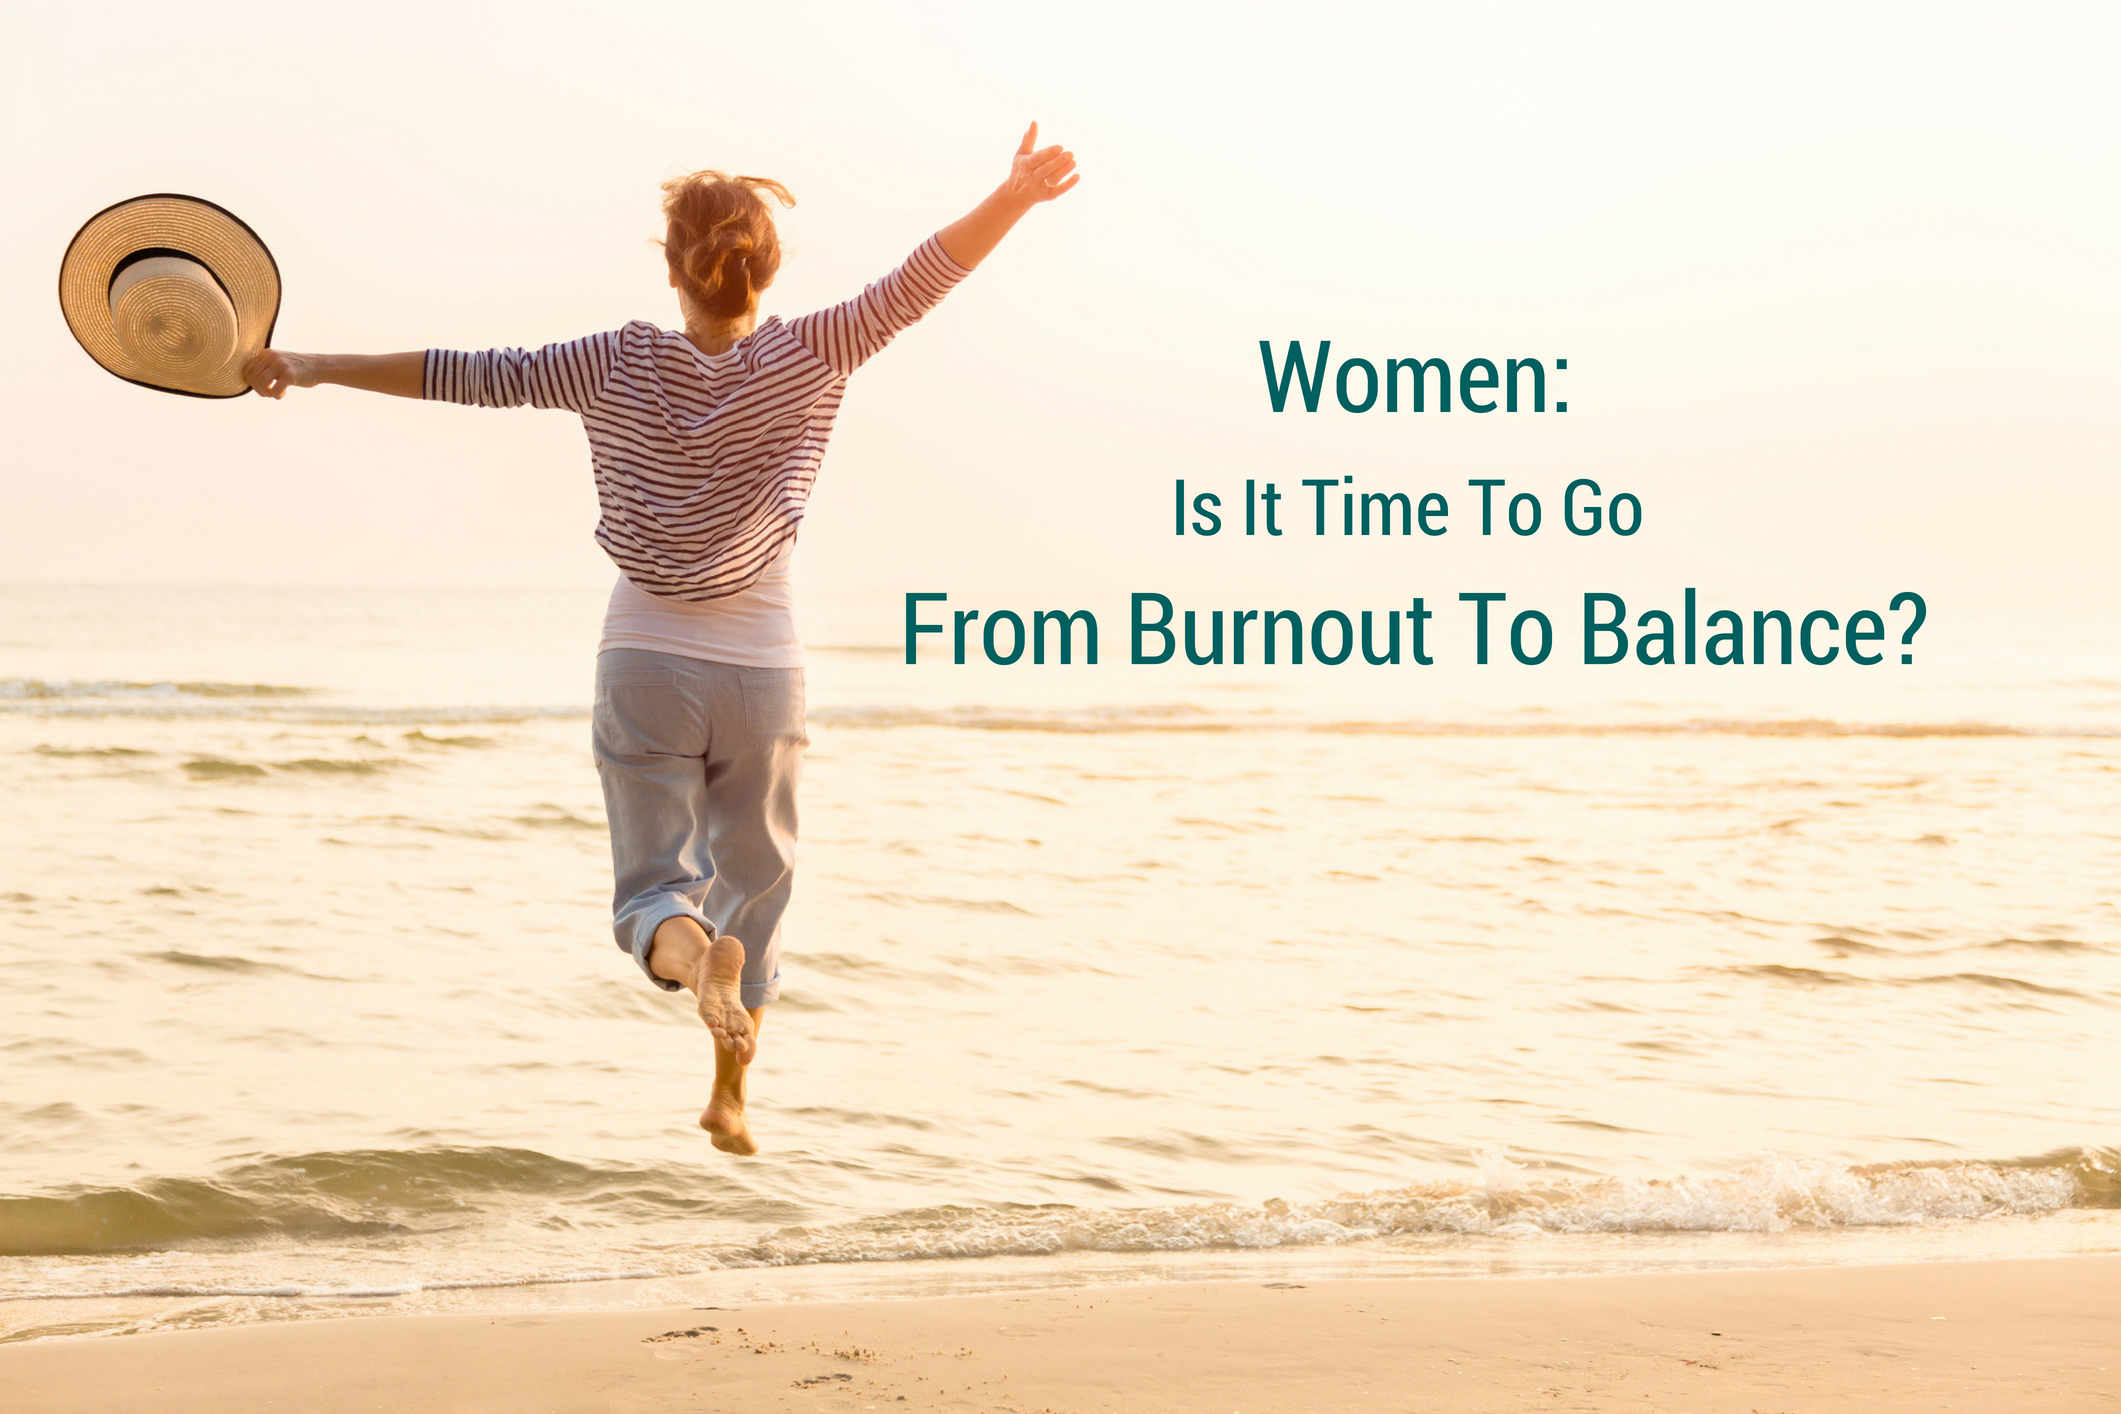 From Burnout To Balance